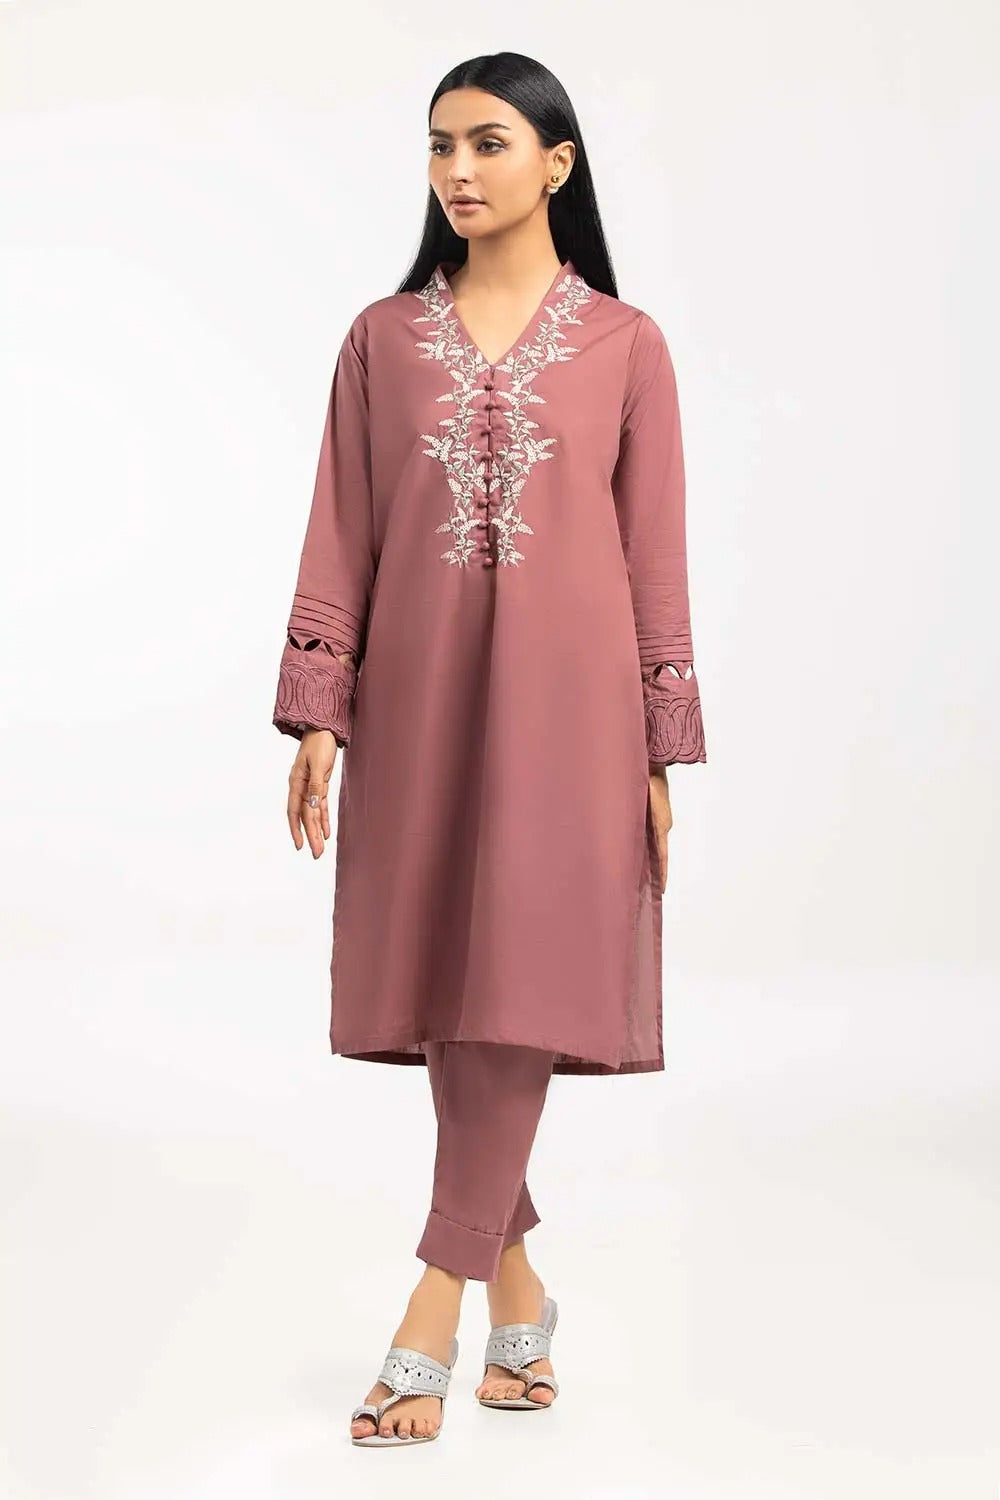 Gul Ahmed Kaaj 02 Piece Stitched Embroidered Cambric Shirt With Trousers IPS-21-83